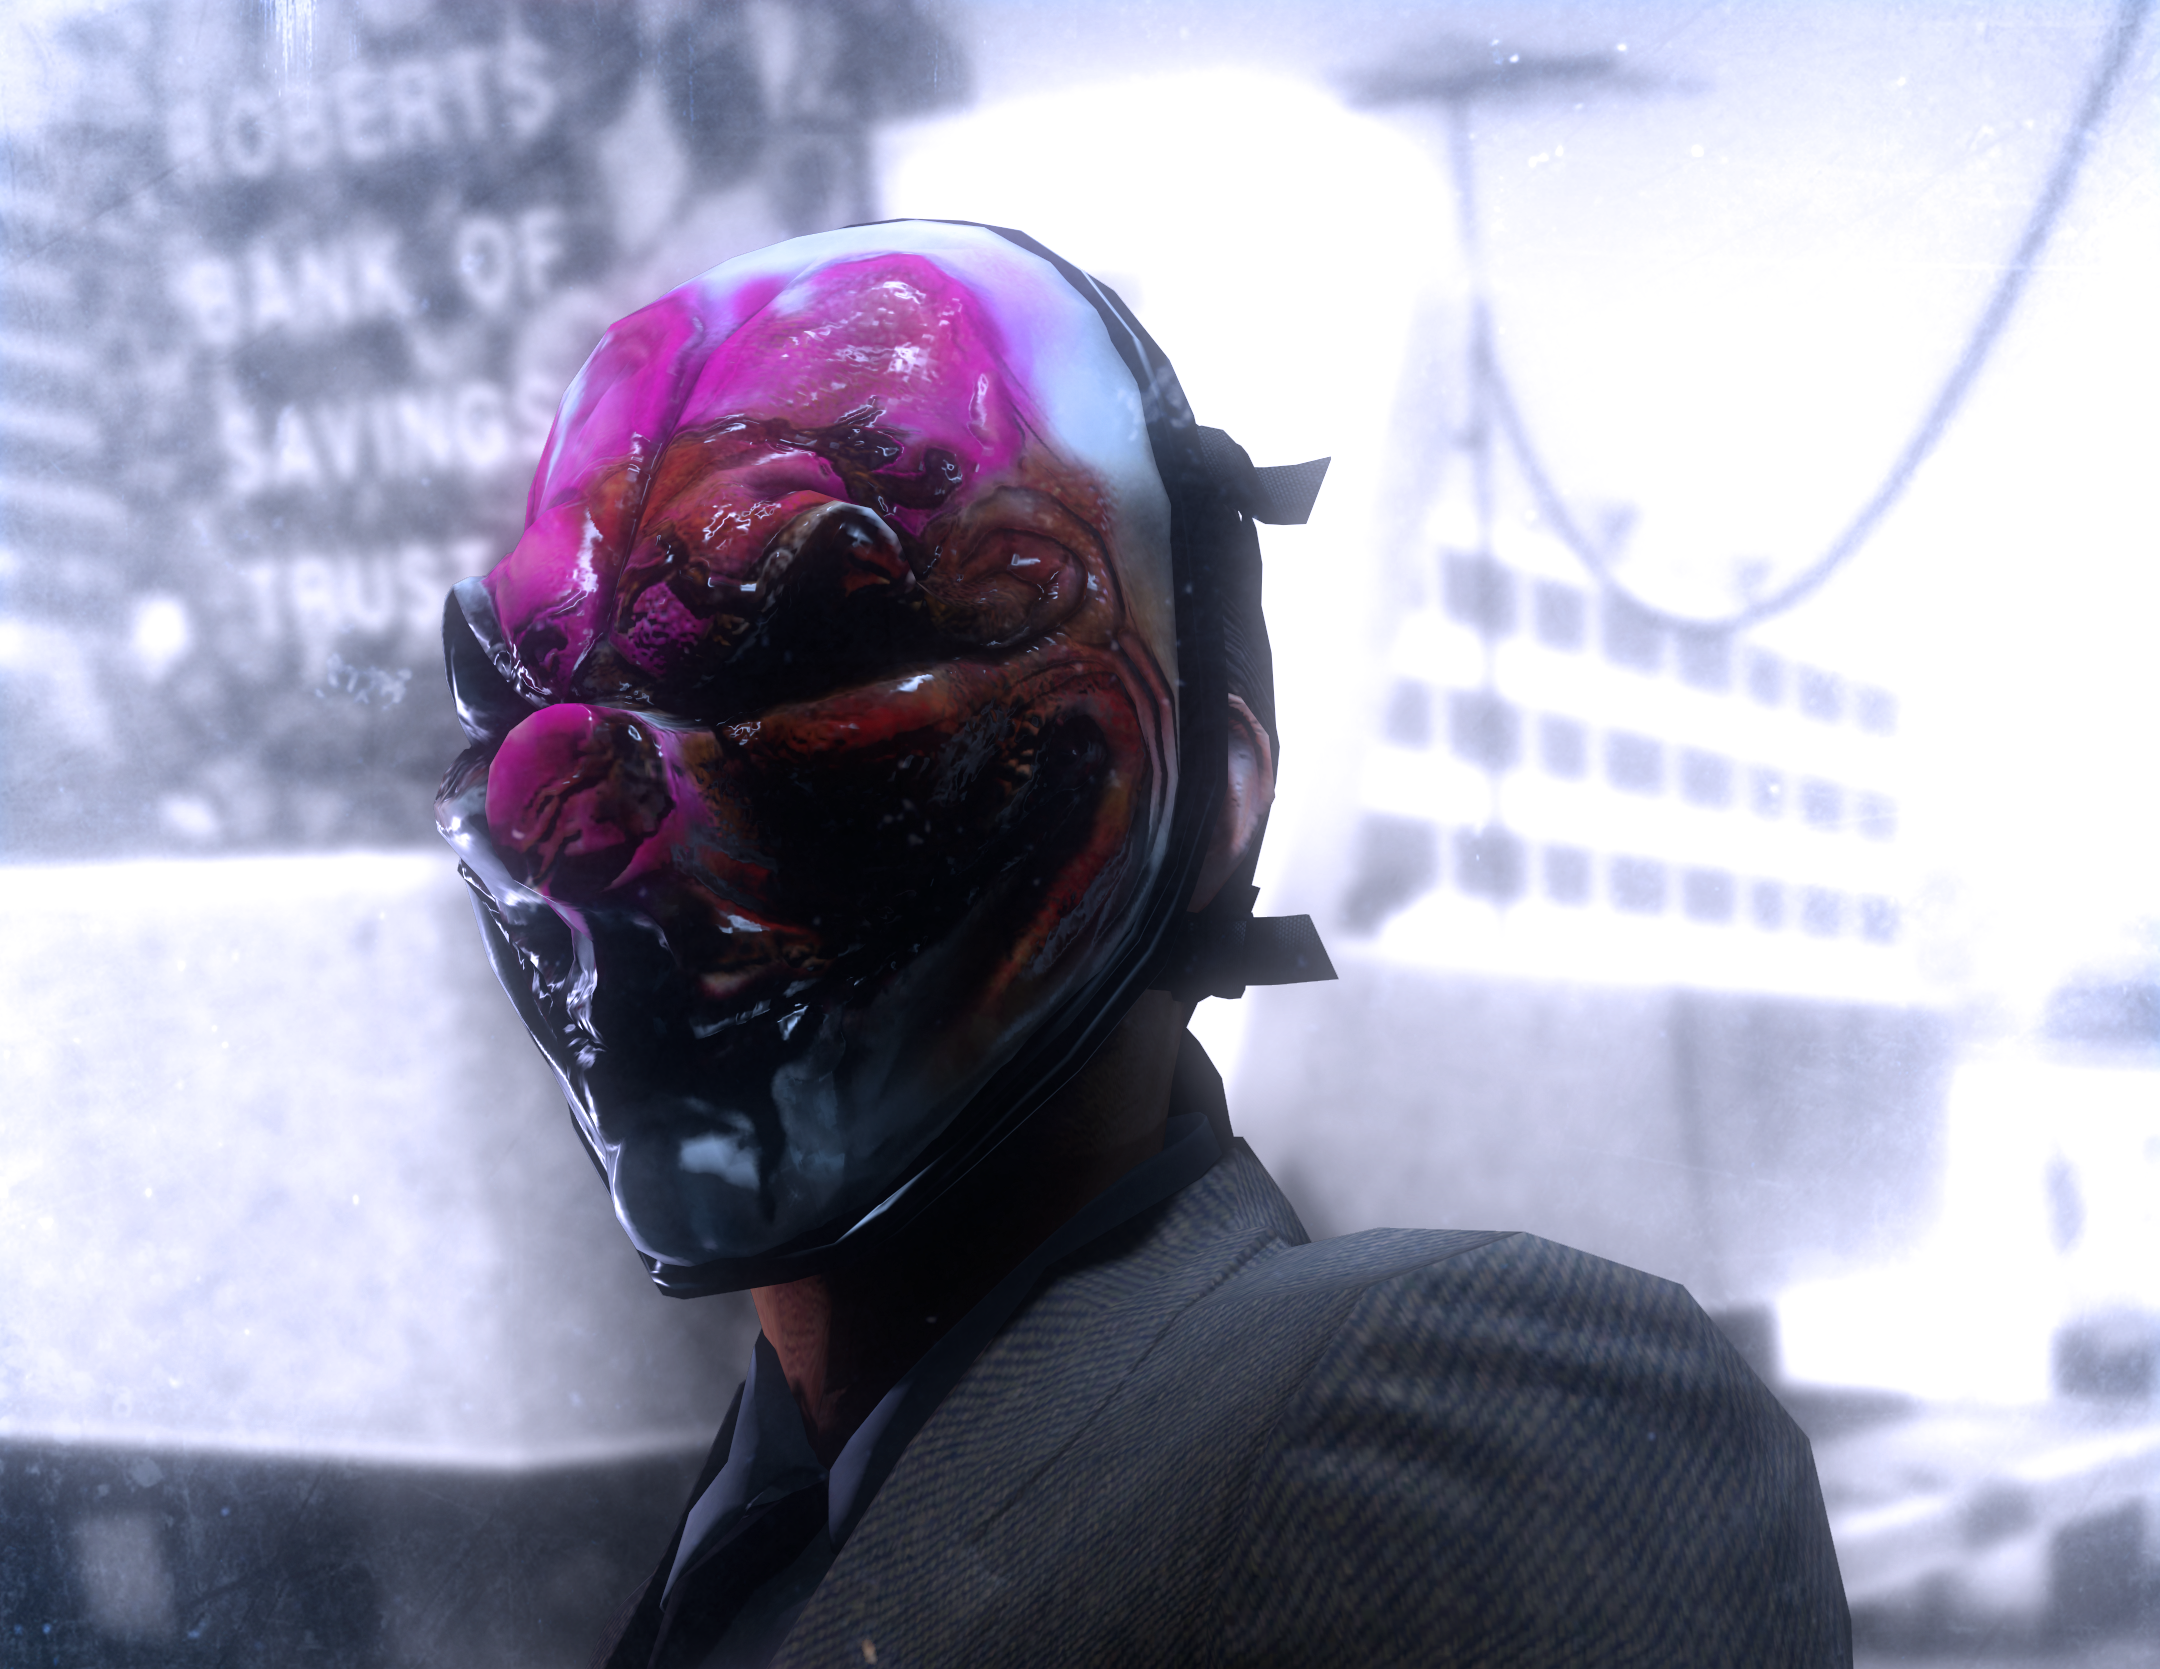 Hoxton Payday Payday 2 2160x1669